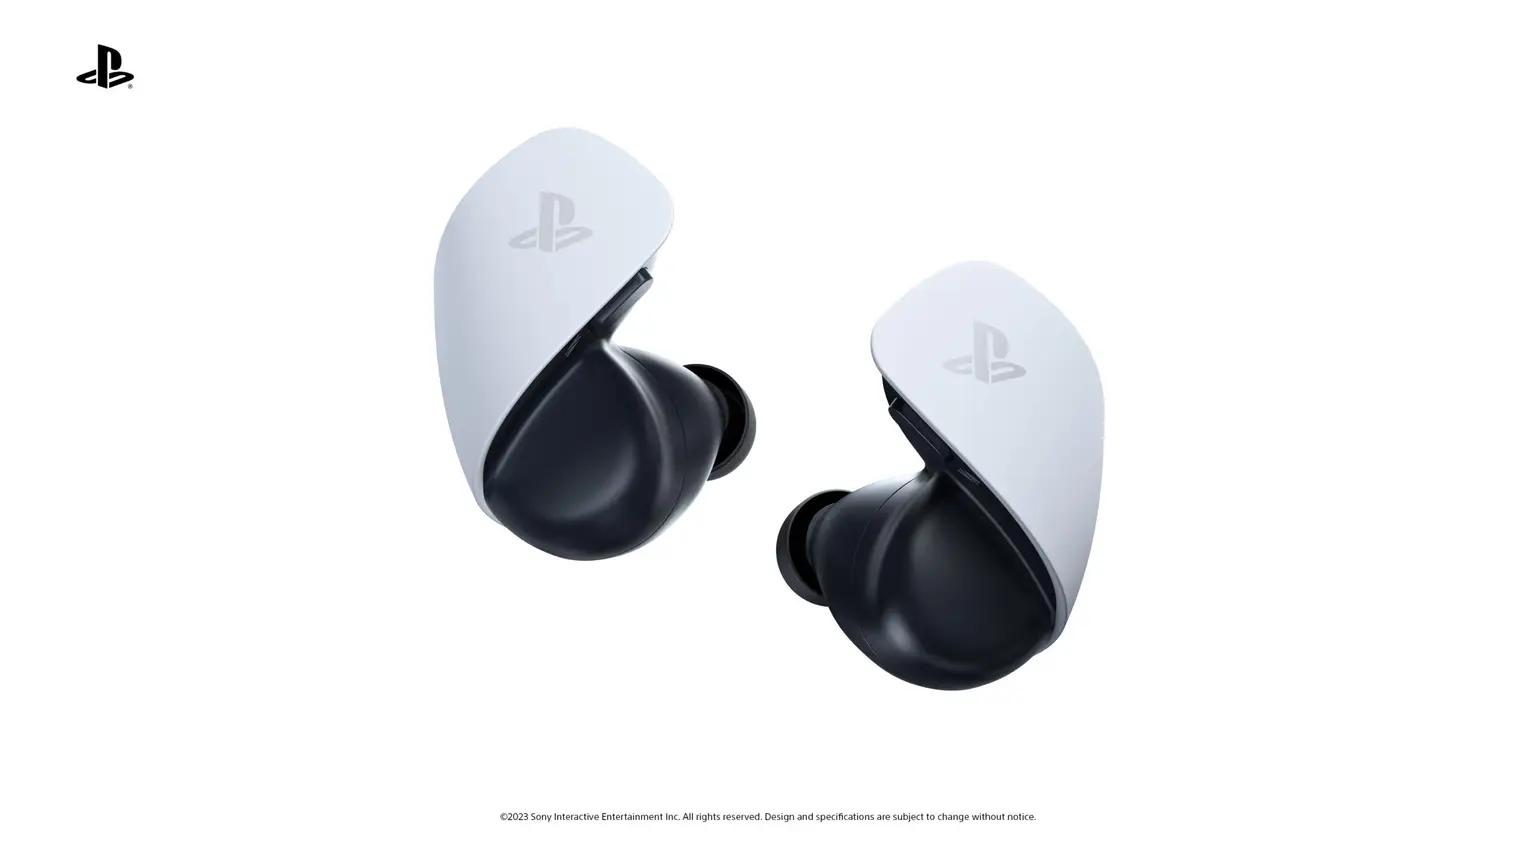 Sony's new PlayStation Link earbuds and headset finally have release dates  - The Verge